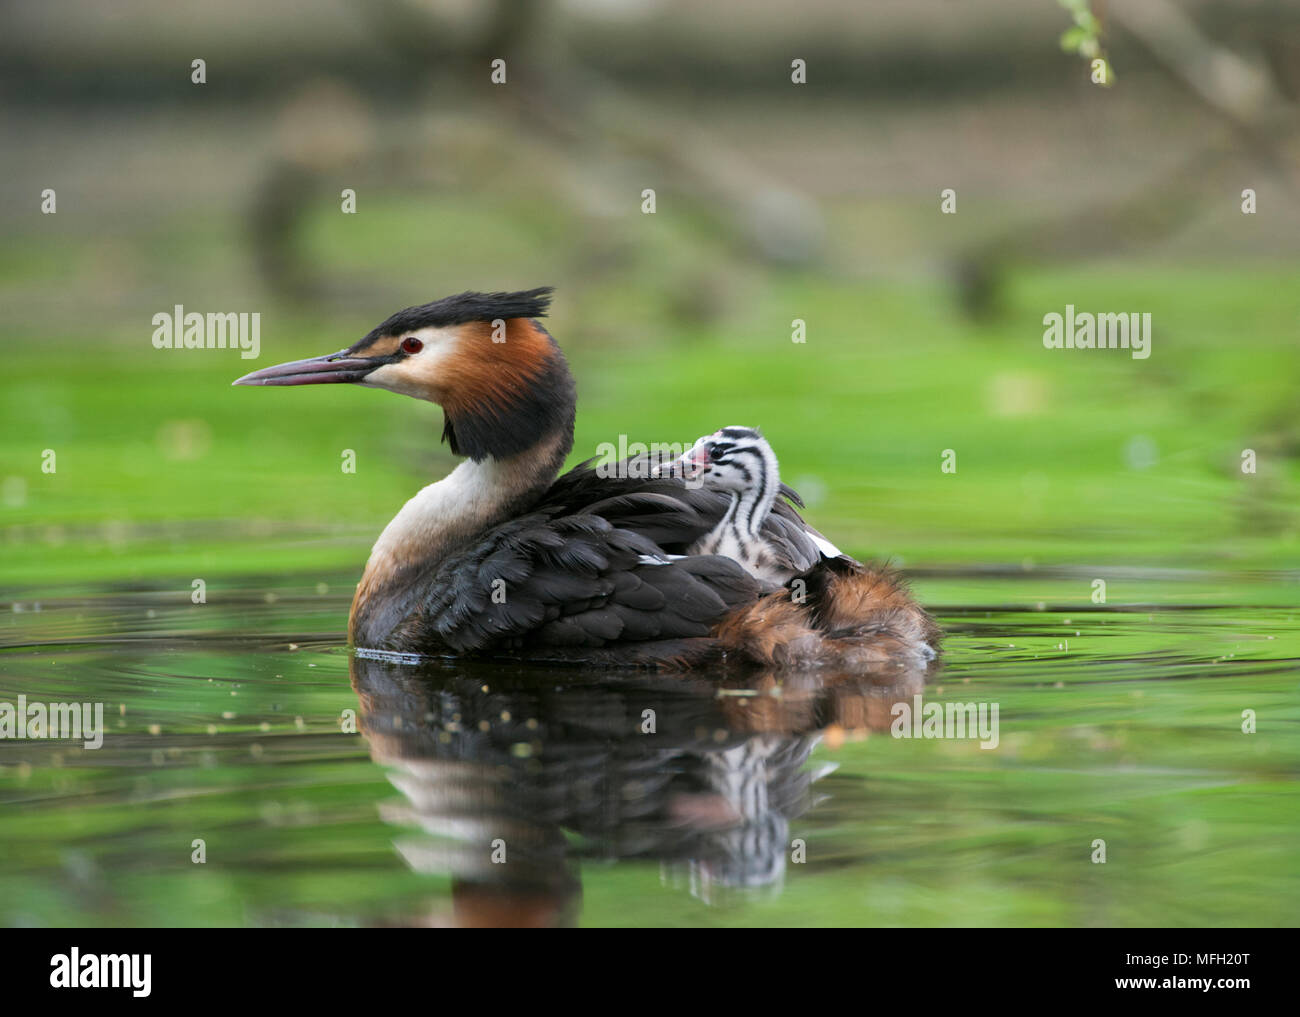 Great Crested Grebe, (Podiceps cristatus), parent bird carrying a single chick on its back, Regents Park, London, Briitish Isles, UK Stock Photo